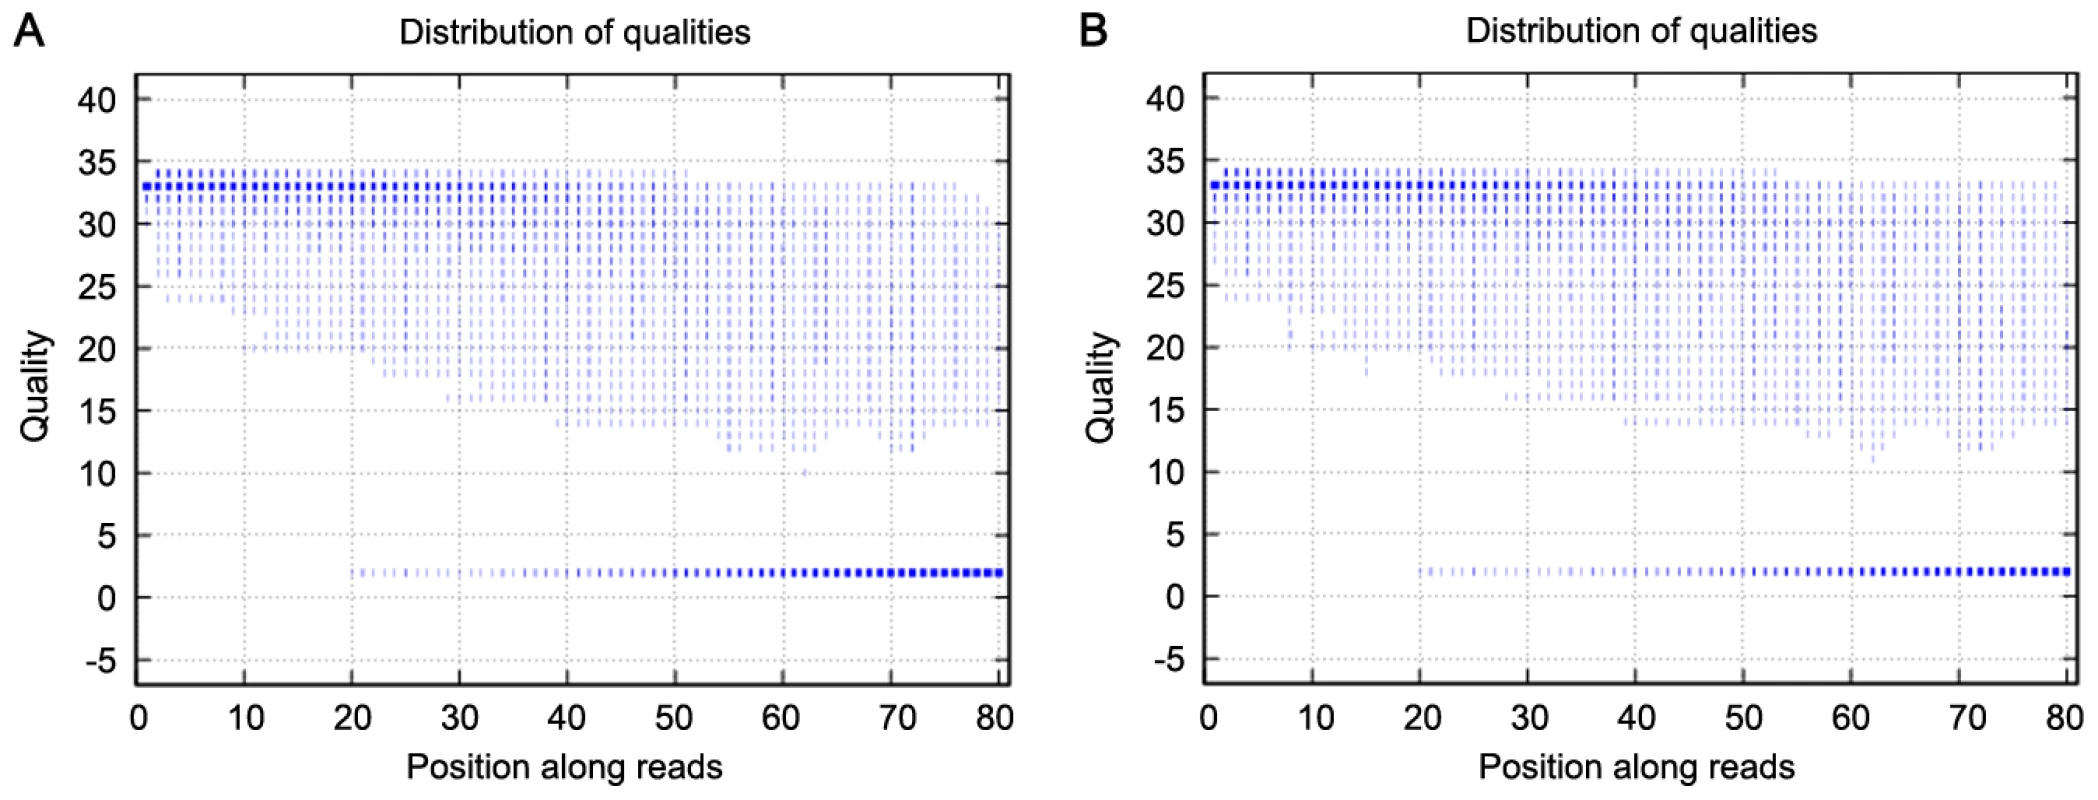 The distribution of qualities of the sequencing reads for the two analyzed samples.